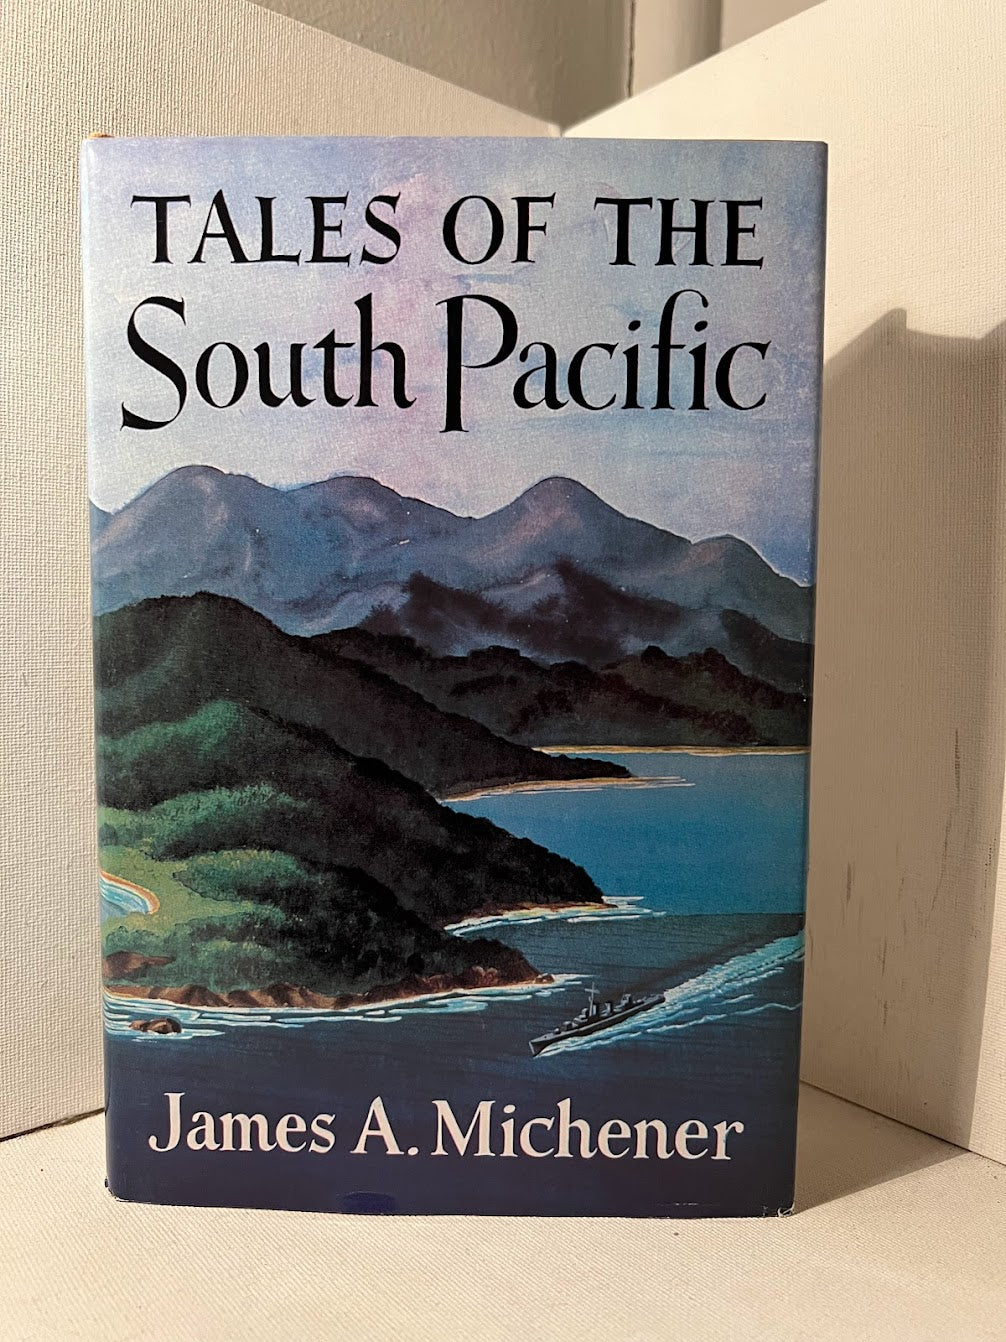 Tales of the South Pacific by James Michener